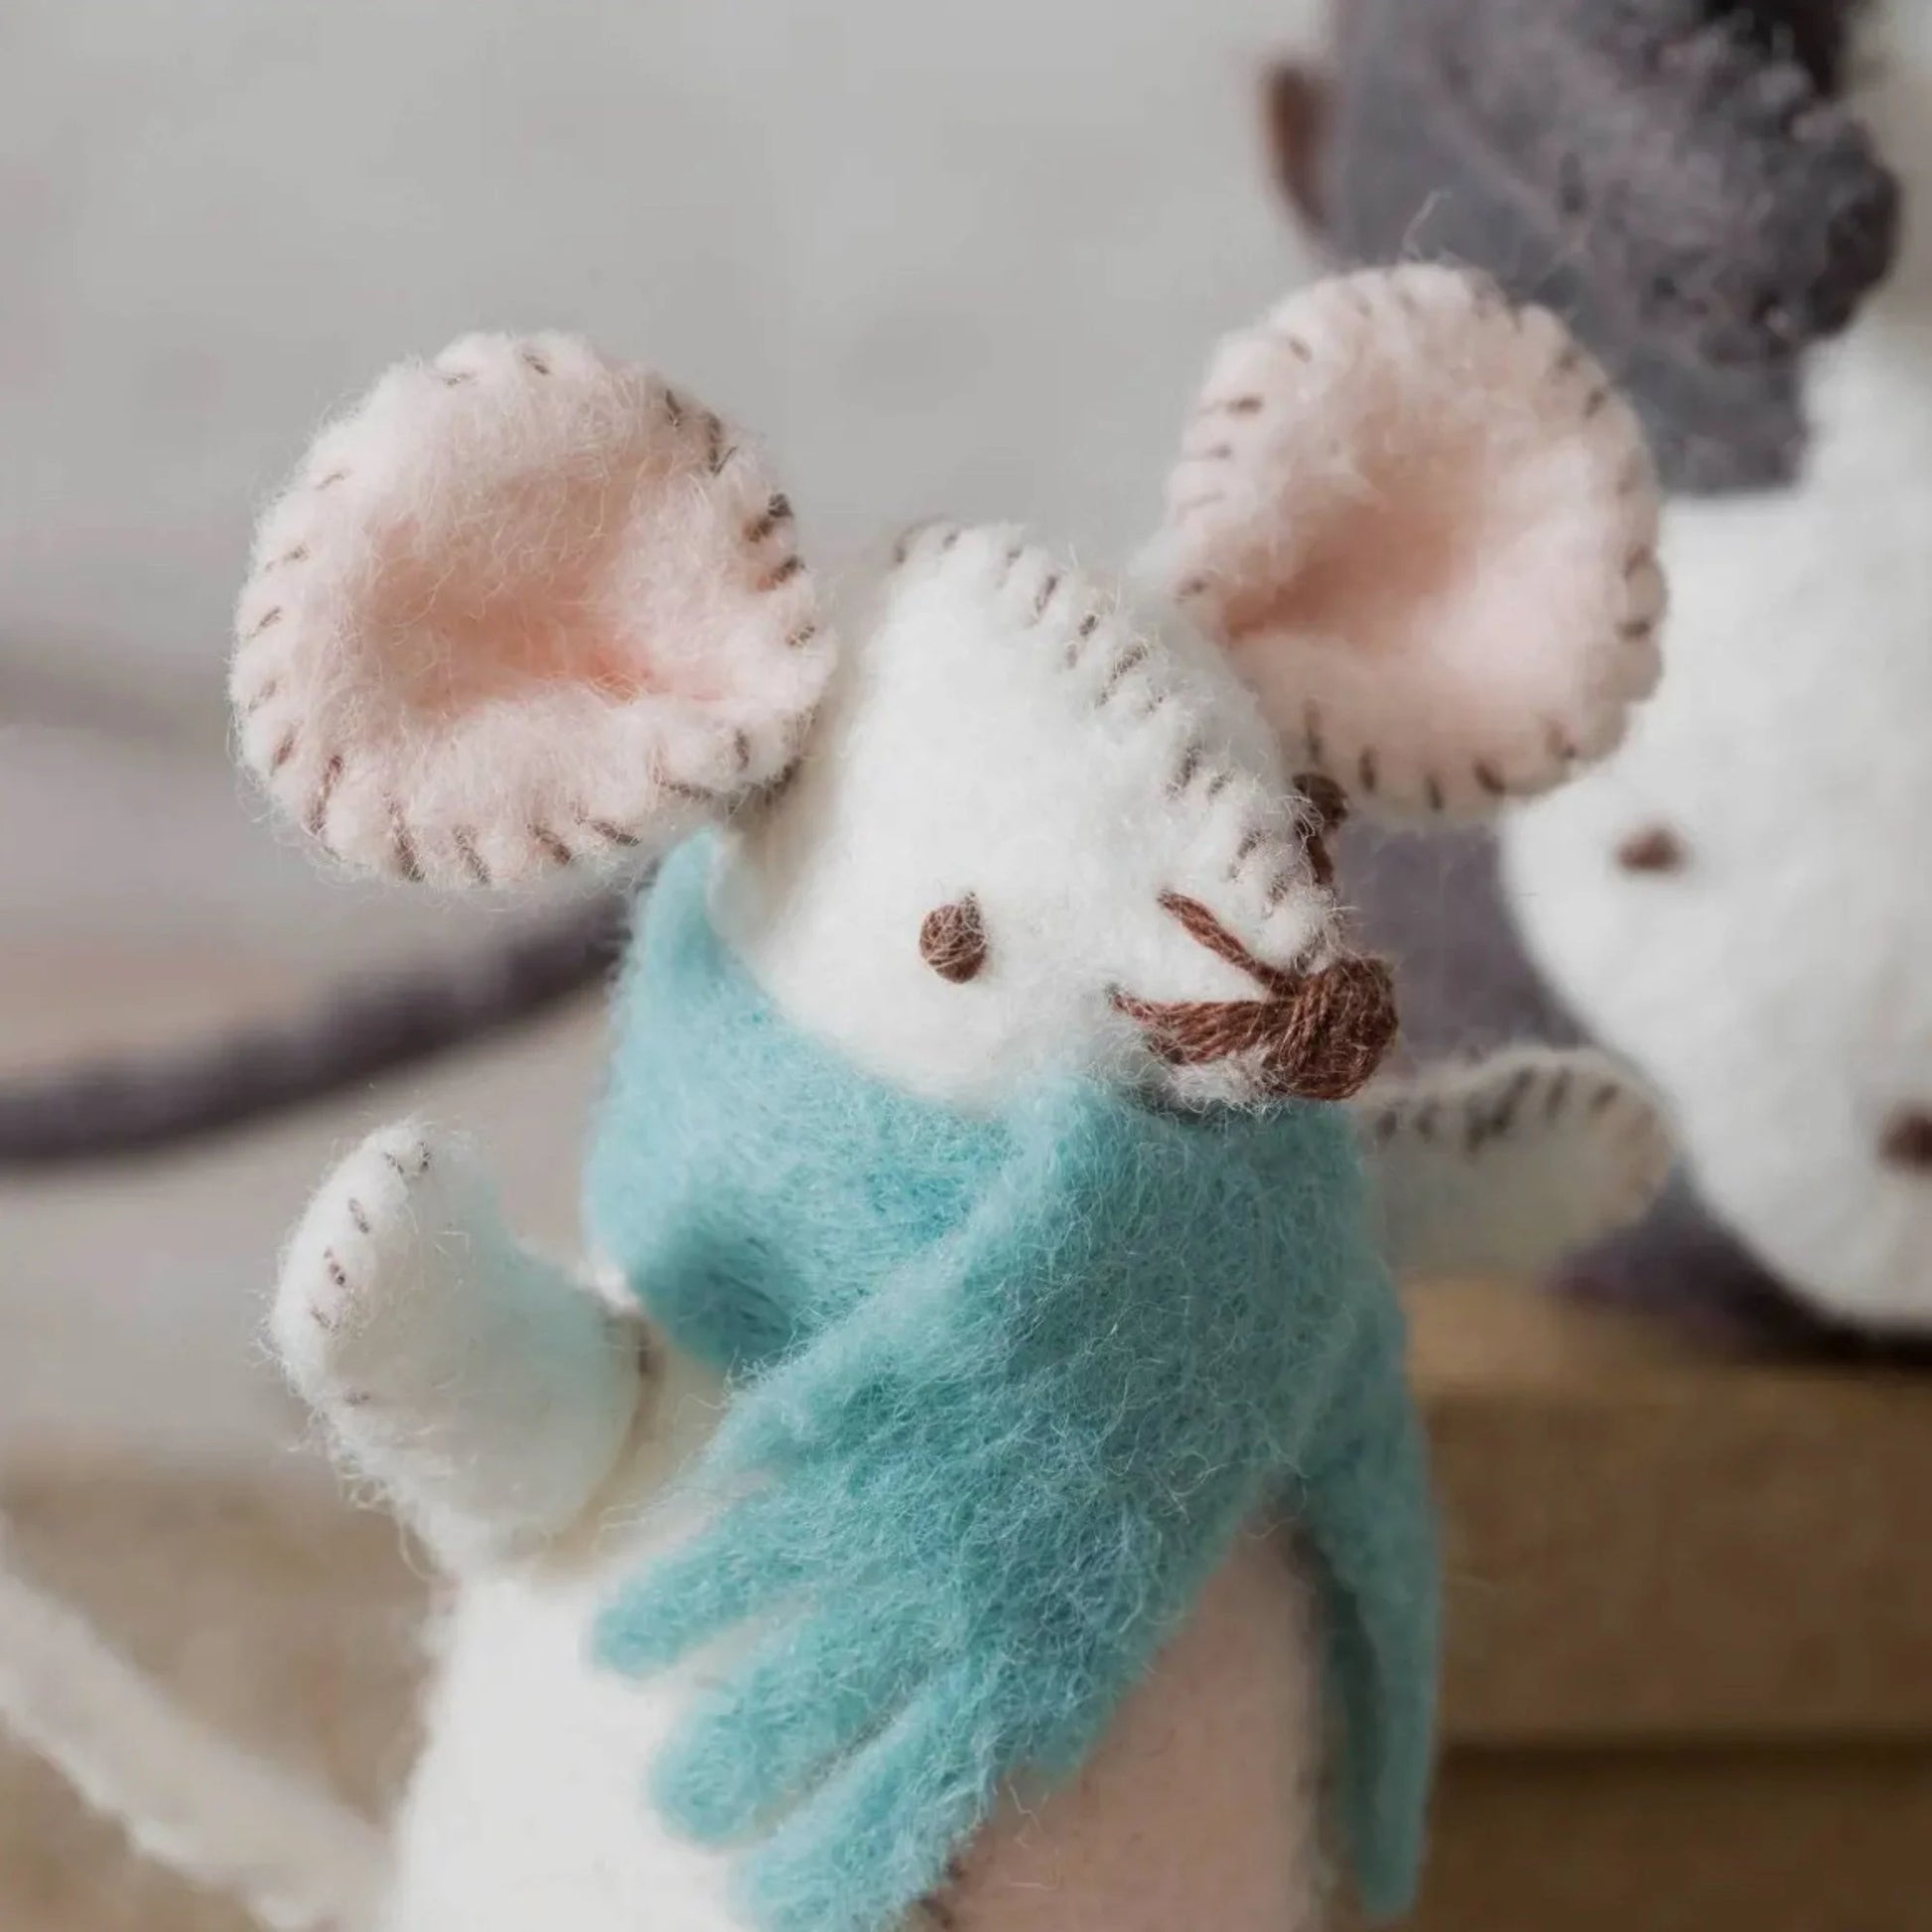 Felt Sewing Kit Mouse Family Little White Mouse in a Scarf by Corinne Lapierre - Alder & Alouette